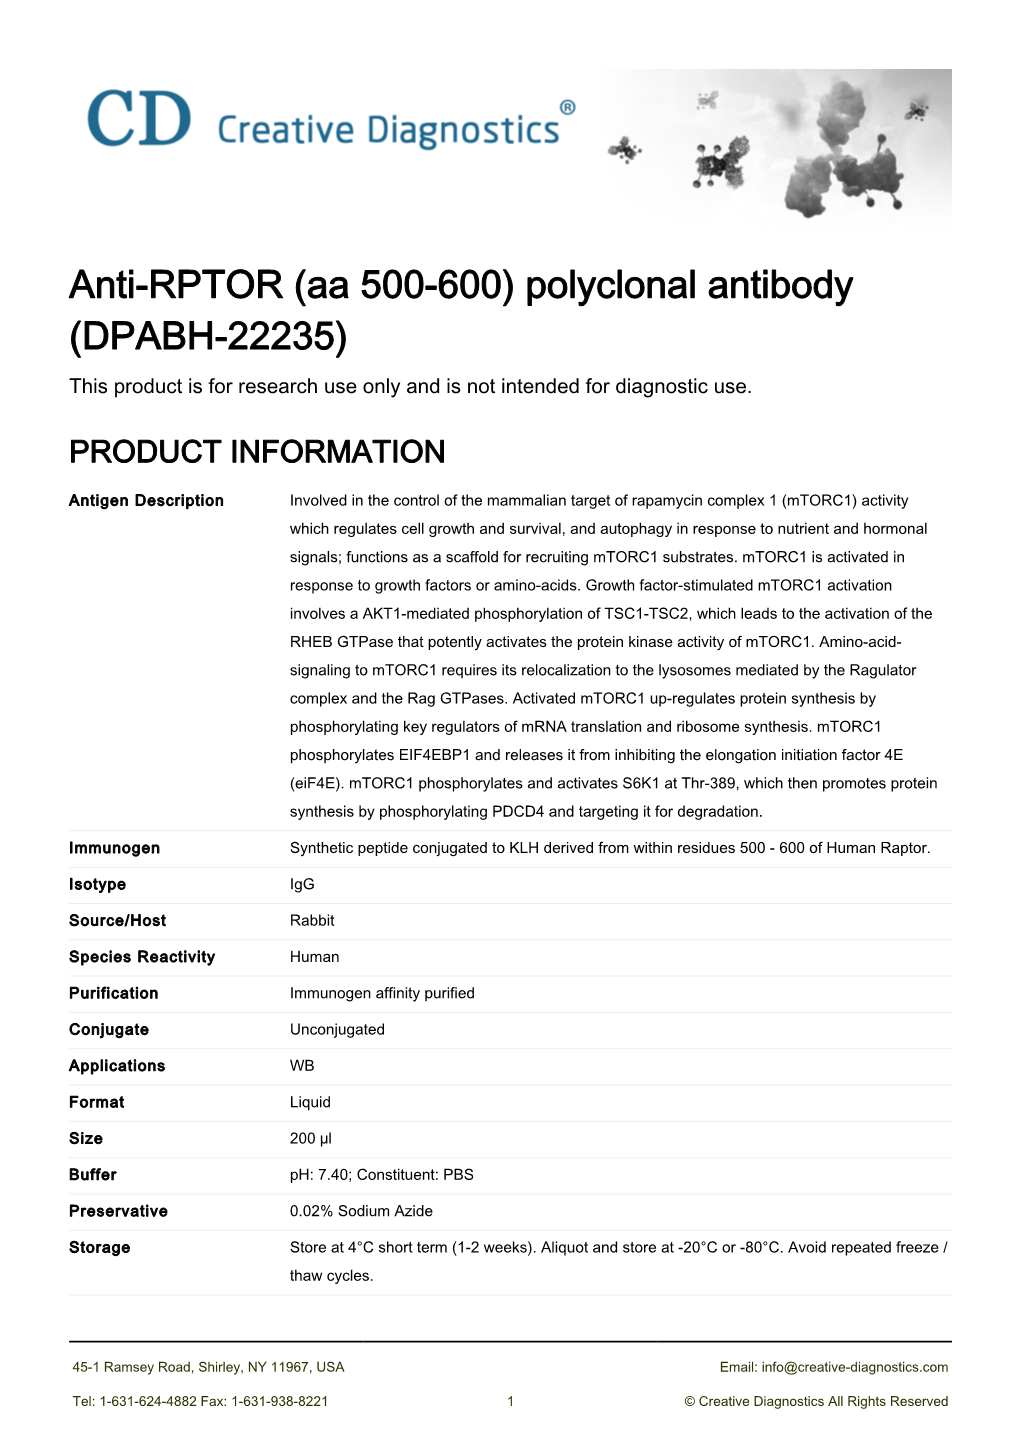 Anti-RPTOR (Aa 500-600) Polyclonal Antibody (DPABH-22235) This Product Is for Research Use Only and Is Not Intended for Diagnostic Use